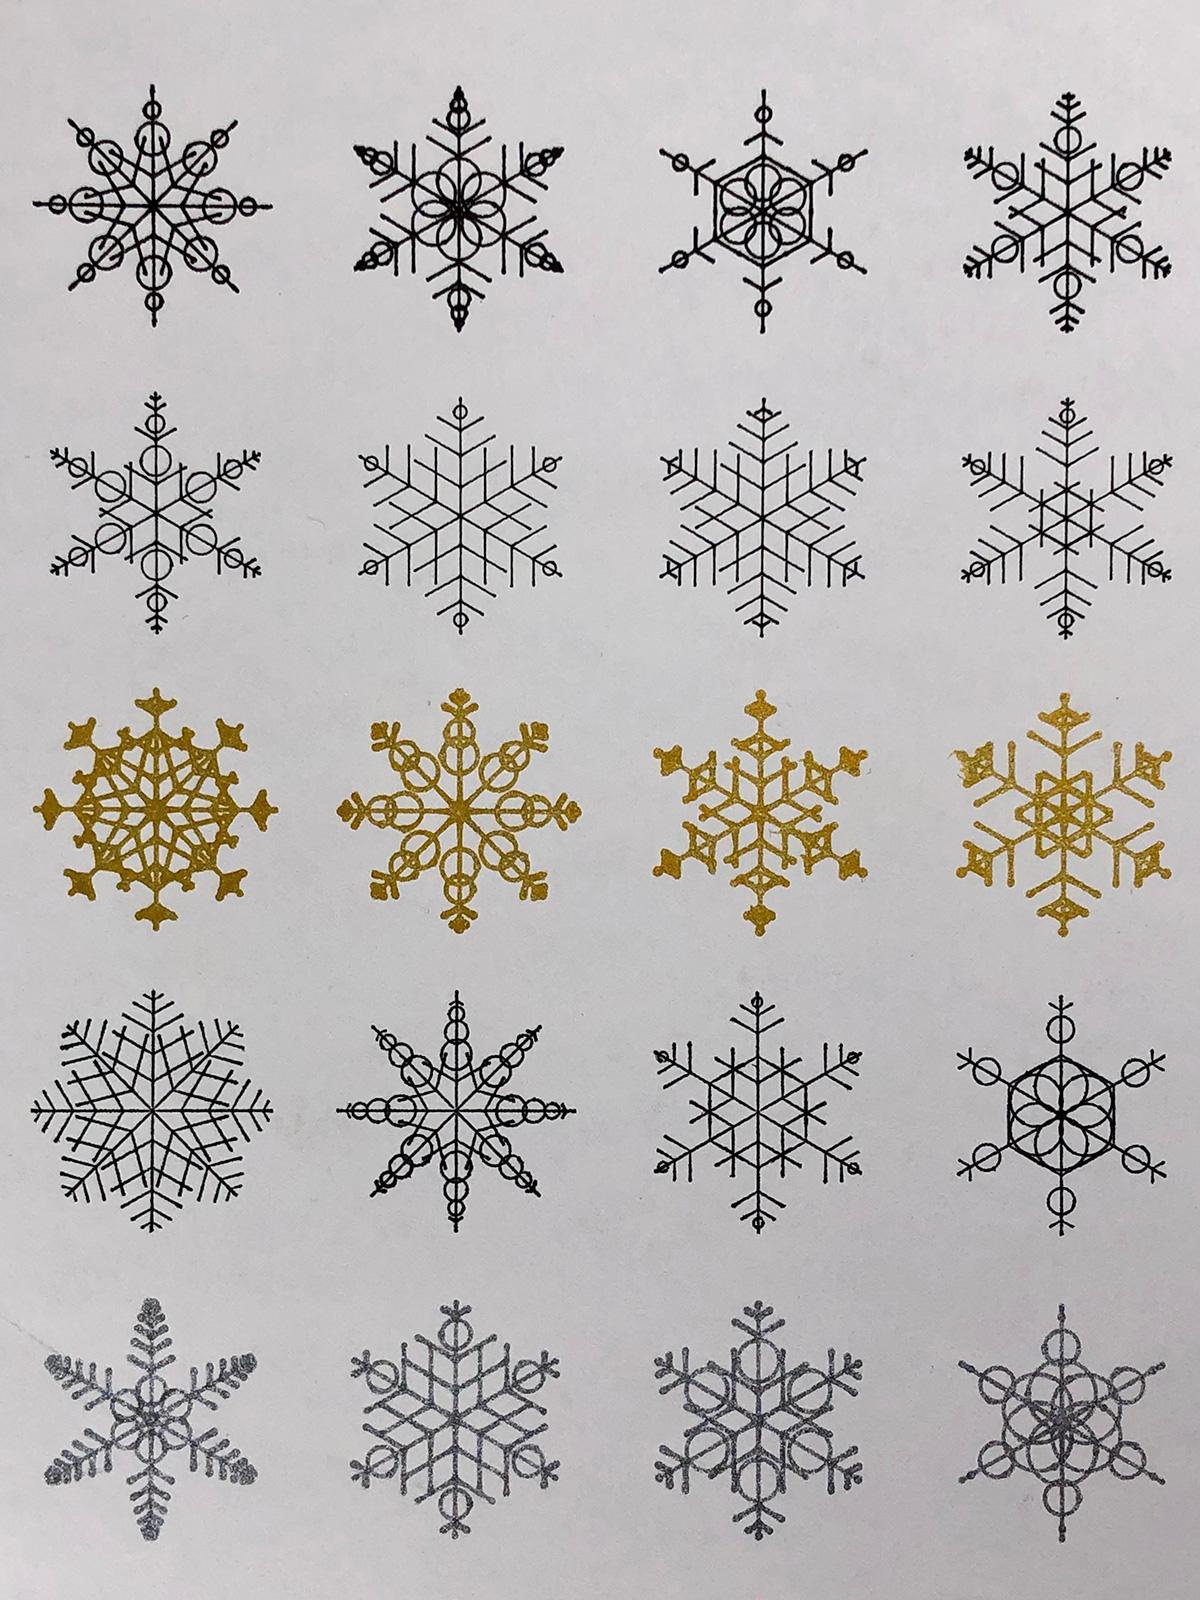 A four-column, five-row grid of “snowflake” shapes. Each shape has six primary lines coming from the center, covered in randomised secondary shapes and lines. The randomised elements make each snowflake look quite distinct